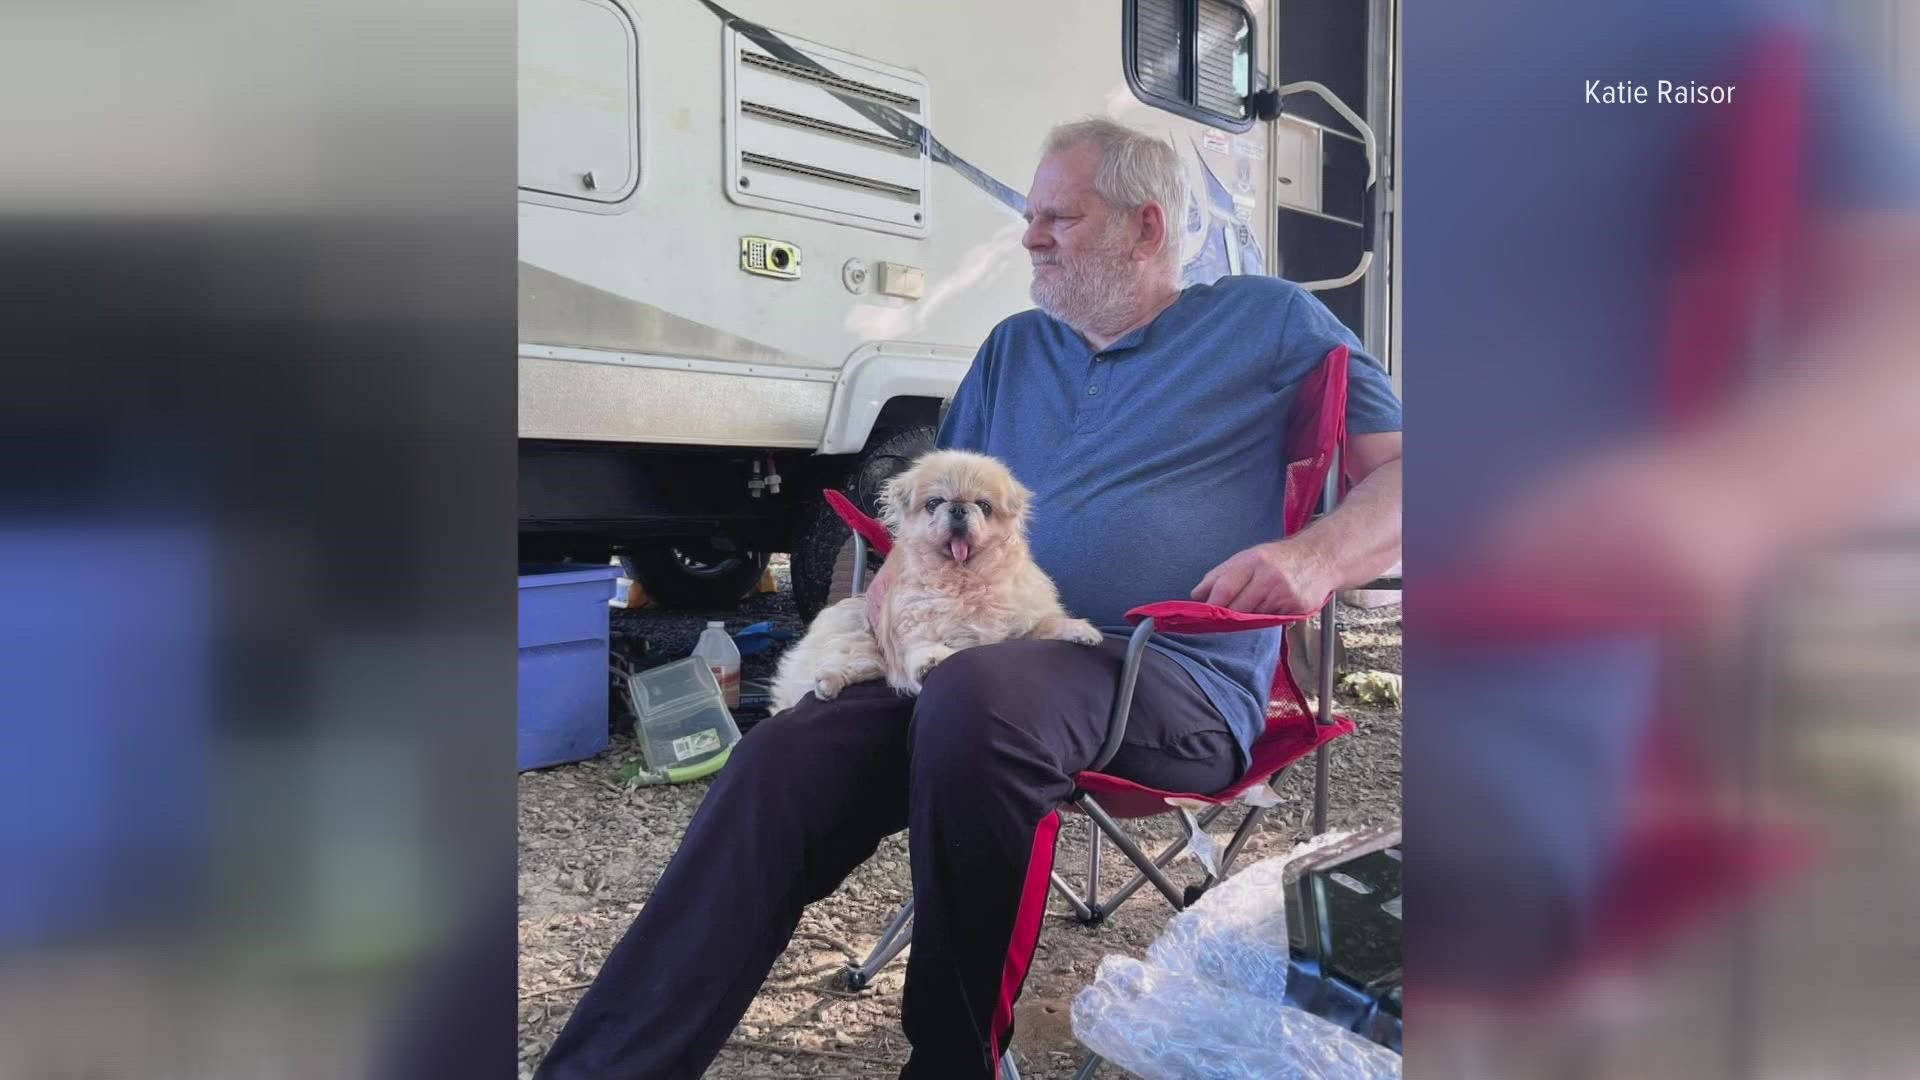 The family of 60-year-old Gage Thurman is trying to come to terms with entering the new year without him.